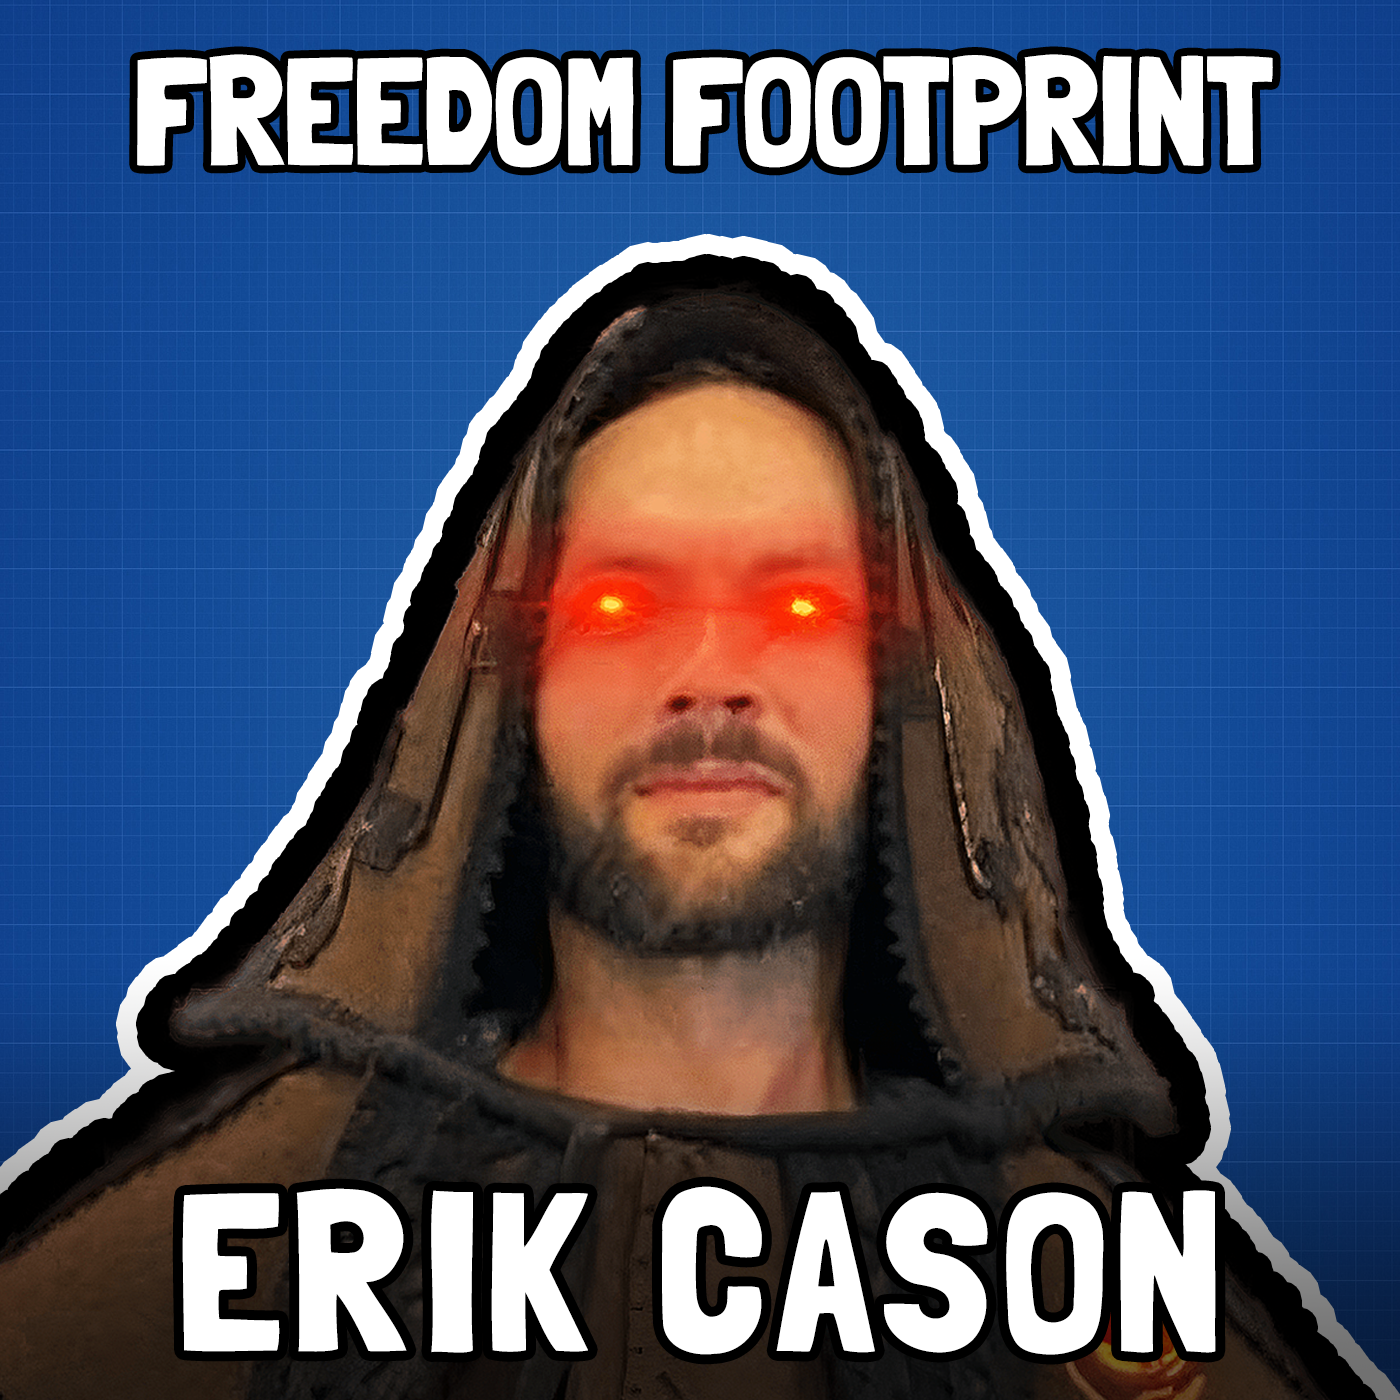 Bitcoin as Cryptographic Truth with Erik Cason - Freedom Footprint Show 33